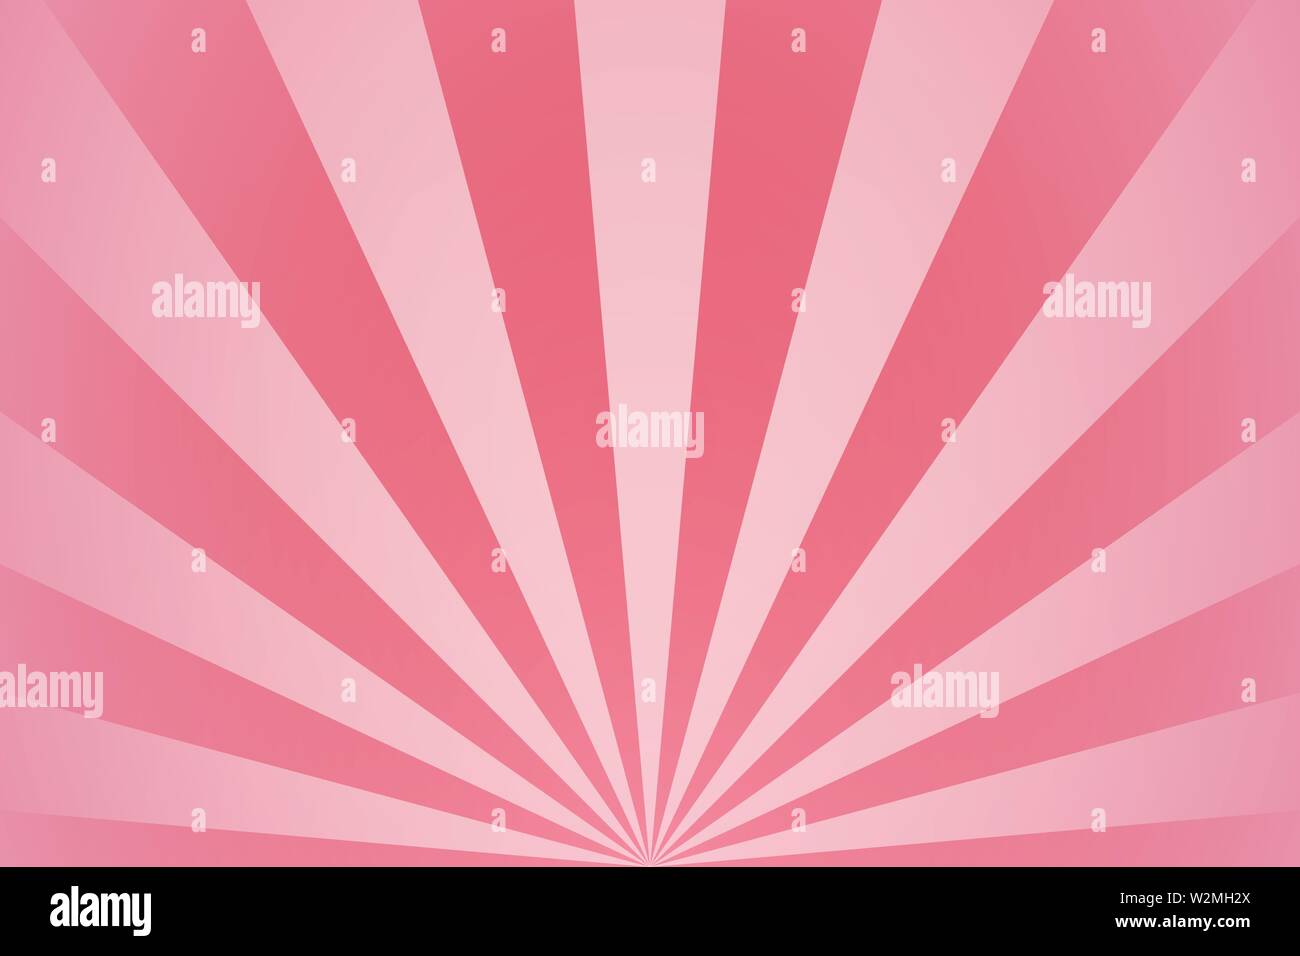 Pink radial beams and rays abstract girly background Stock Vector